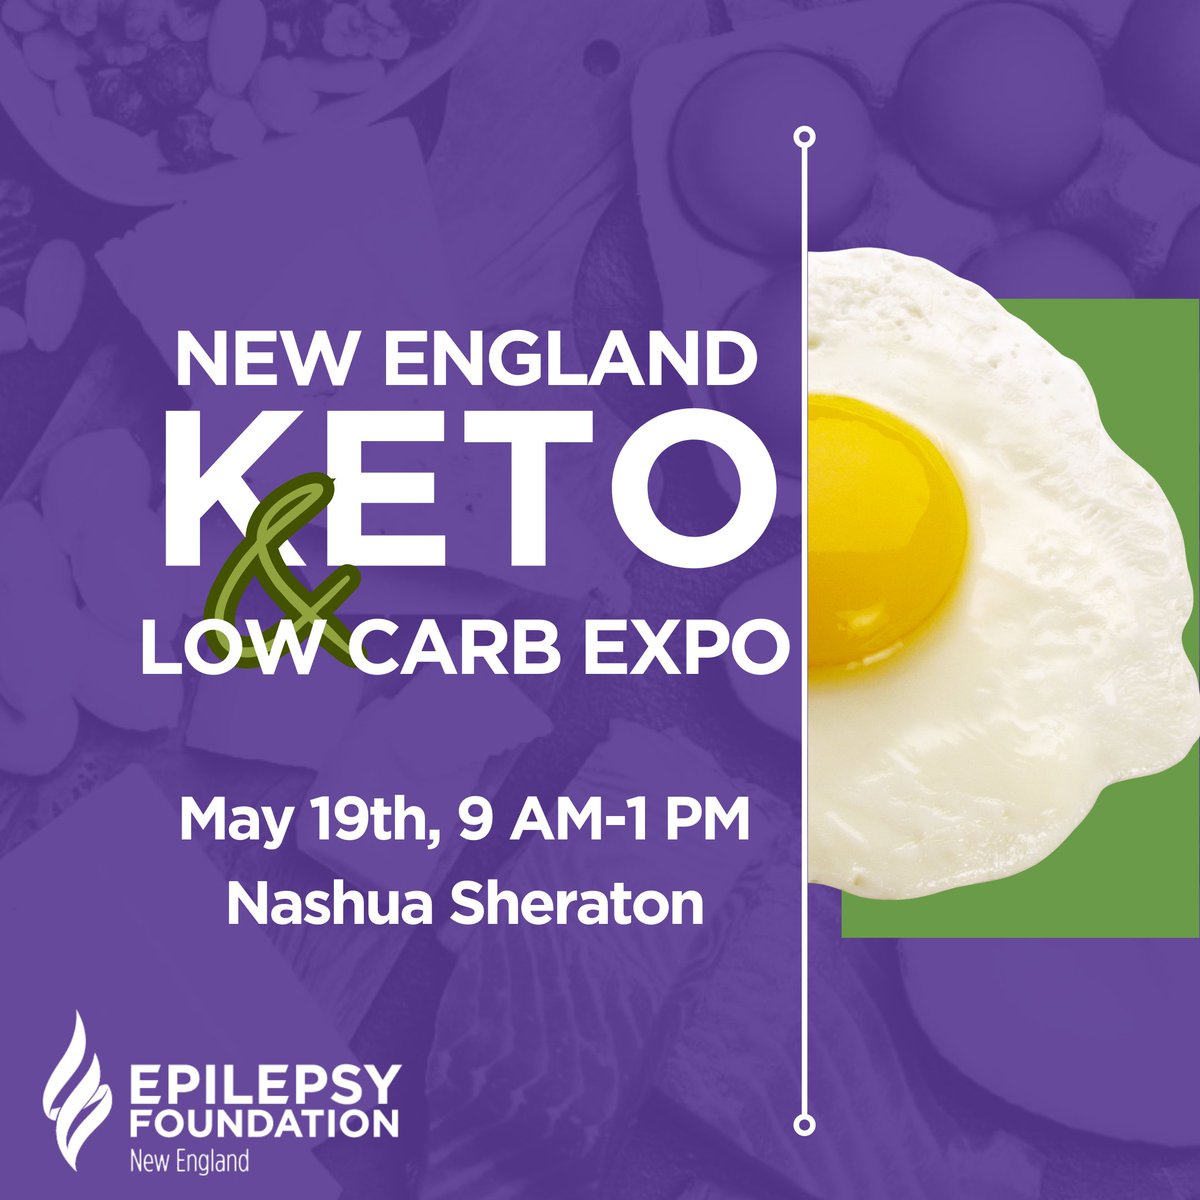 DYK? April is #NationalBrunchMonth, which is the ideal opportunity to explore some #keto options. Get started by joining us at the New England Keto & Low Carb Expo and discover how these diets benefit those living with #epilepsy.

Register today: bit.ly/4cLjTEv 💜